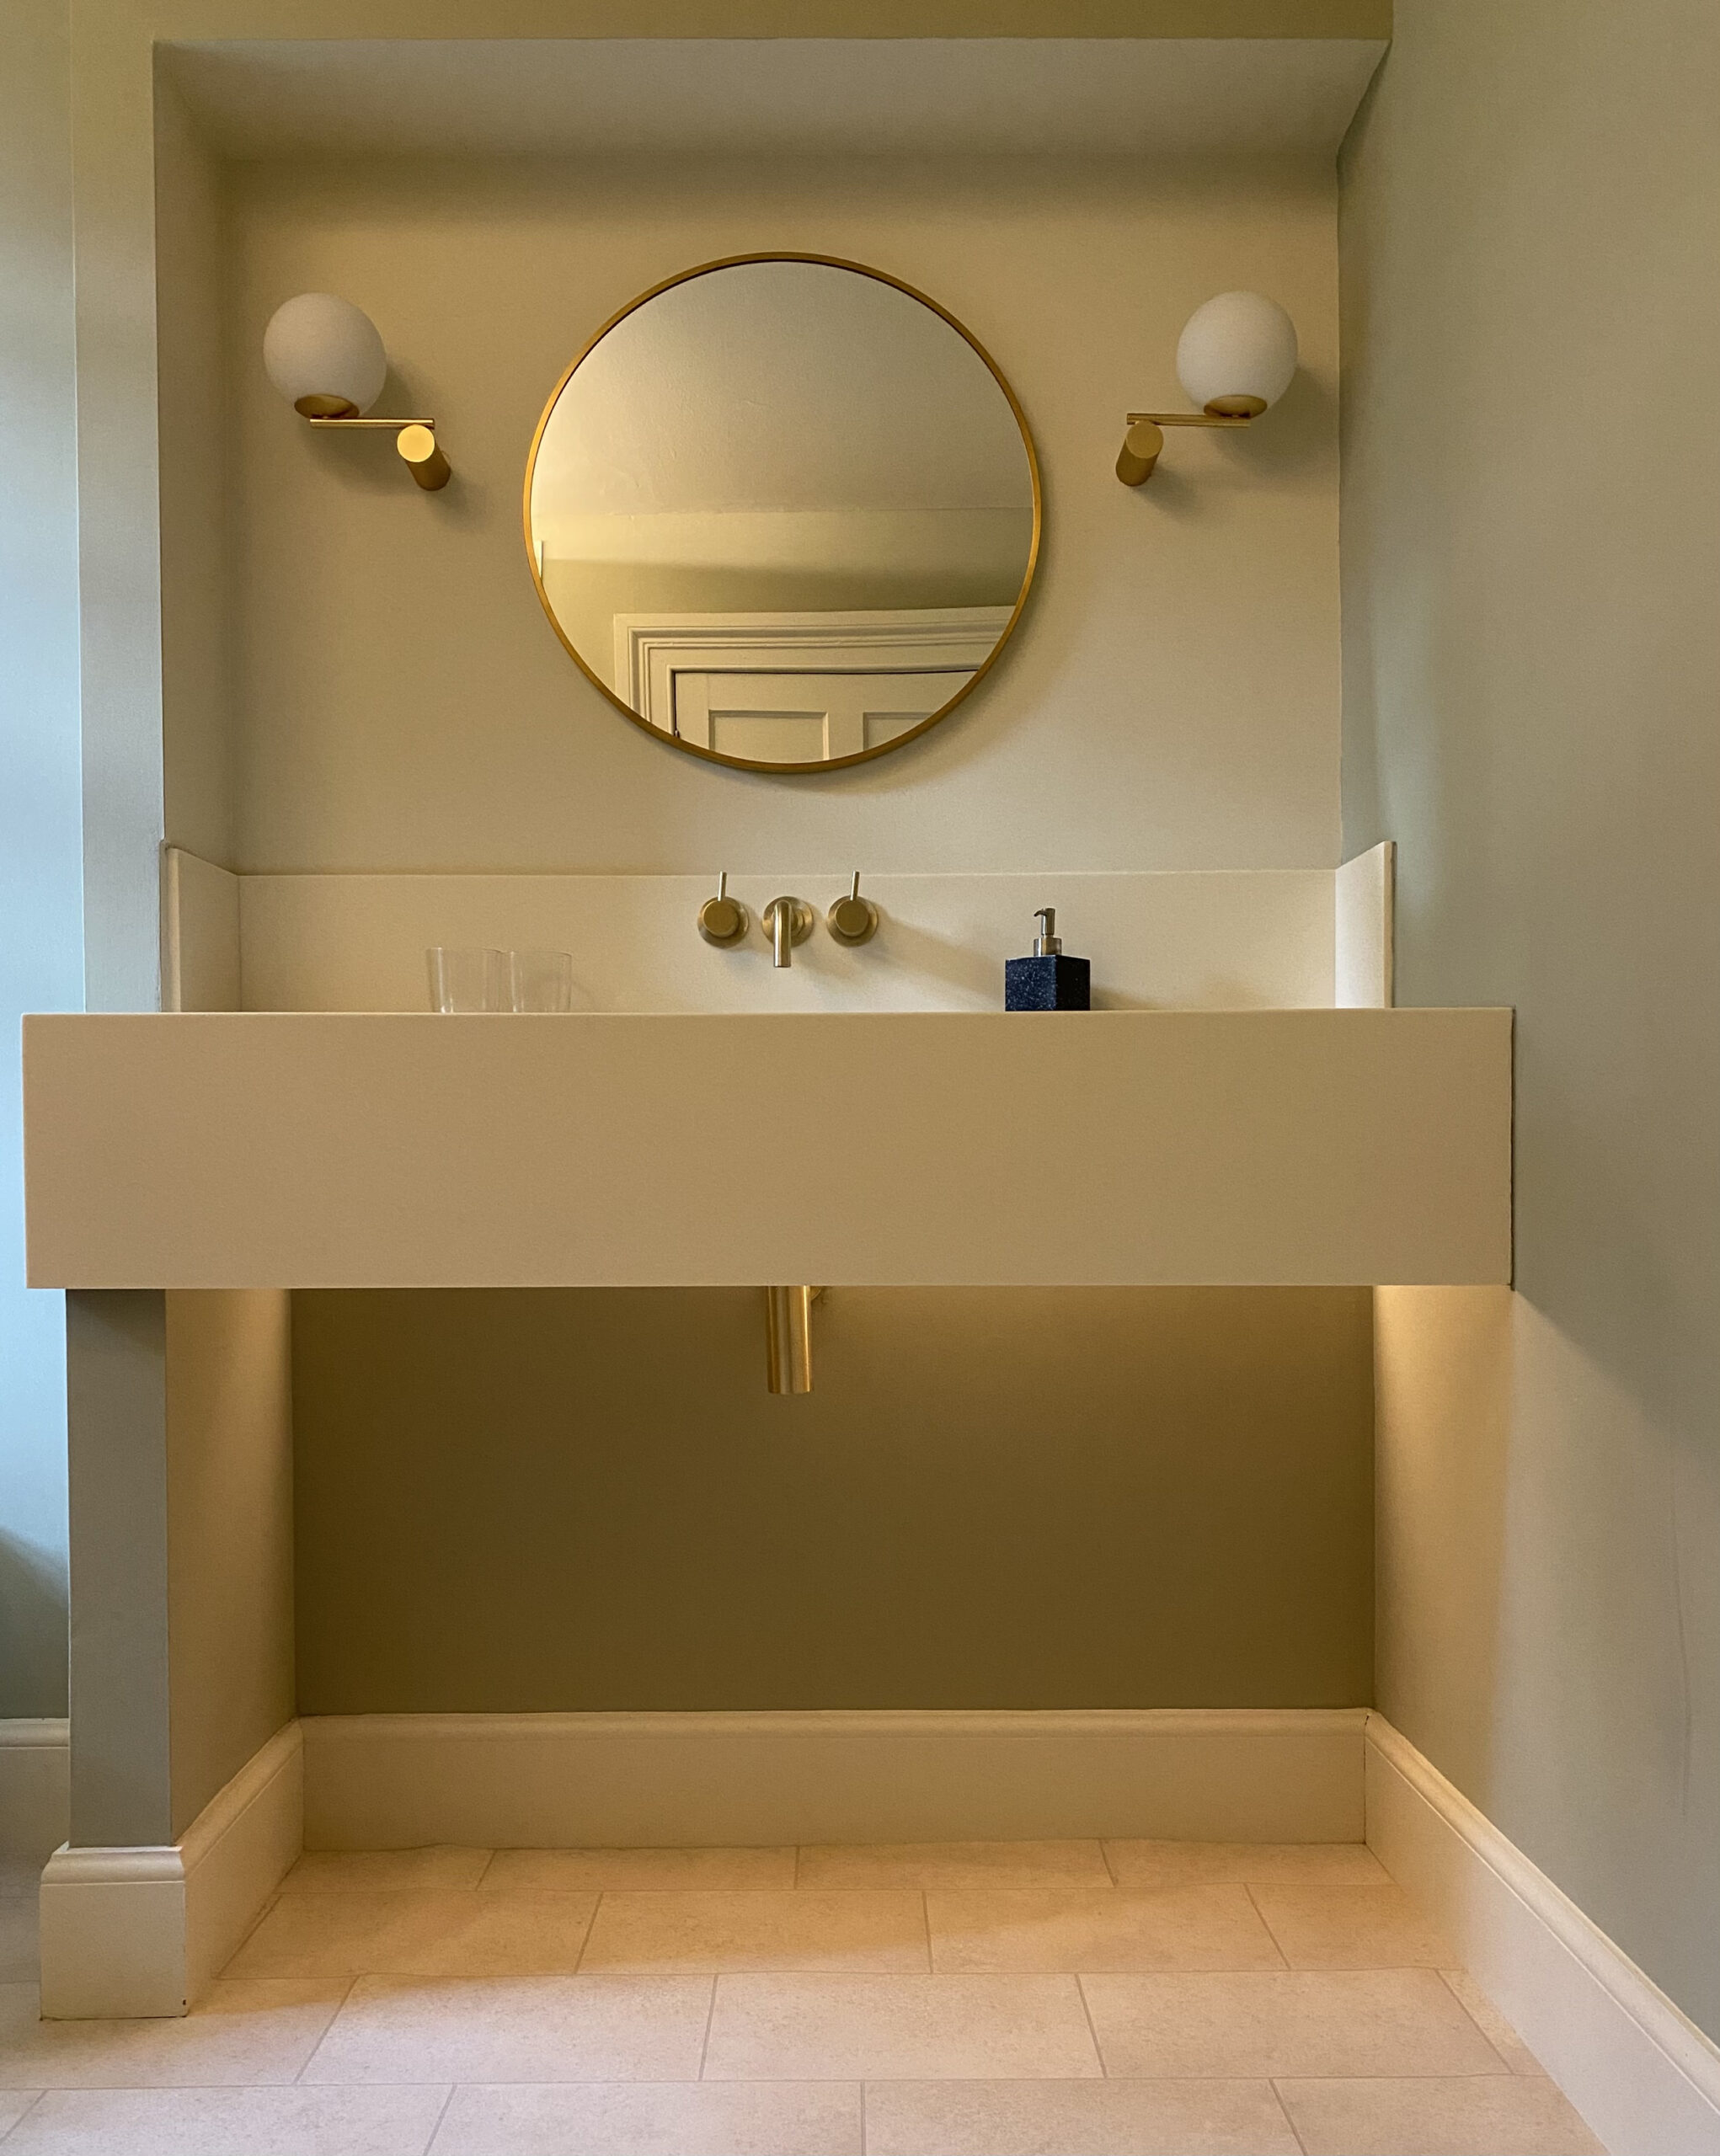 5 tips for lighting a bathroom. A photo of a vanity basin with round mirror in a modern domestic bathroom